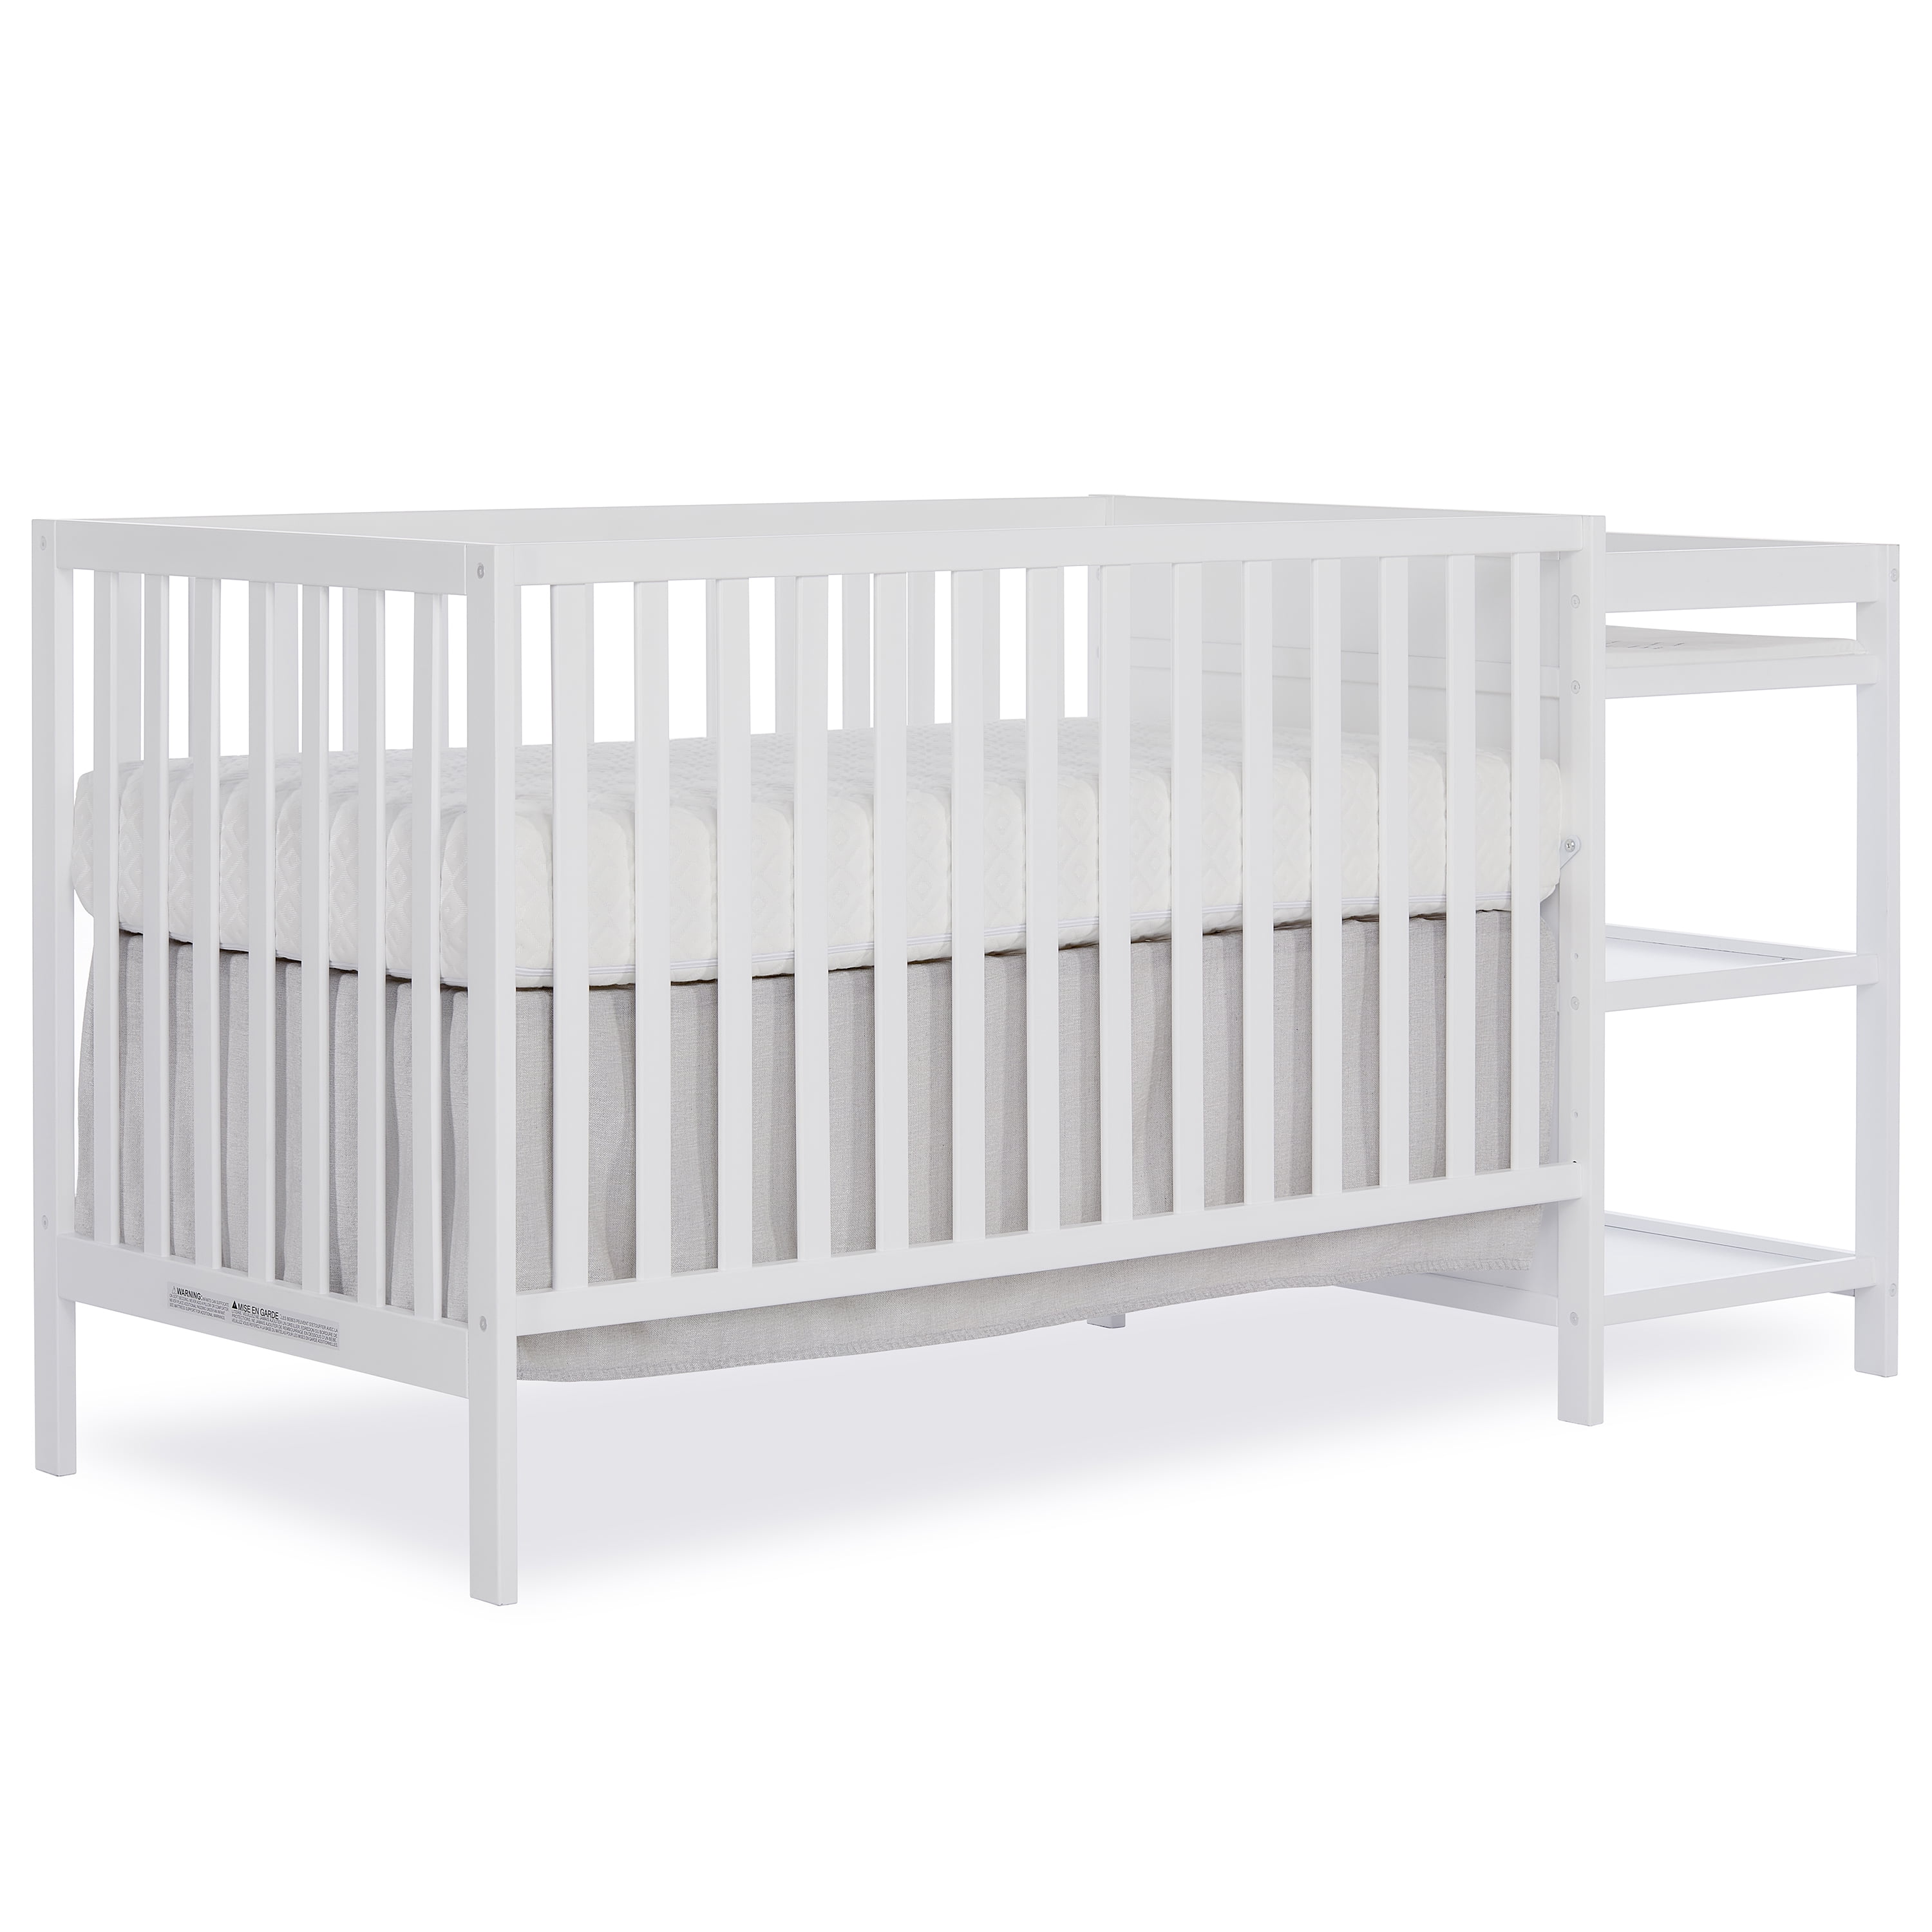 MADDOX Nursery Baby Cot Bed 140x70cm Toddler Bed Converts into a Junior and Sofa Bed with included Safety Wooden Guard Barriers Grey Love For Sleep 